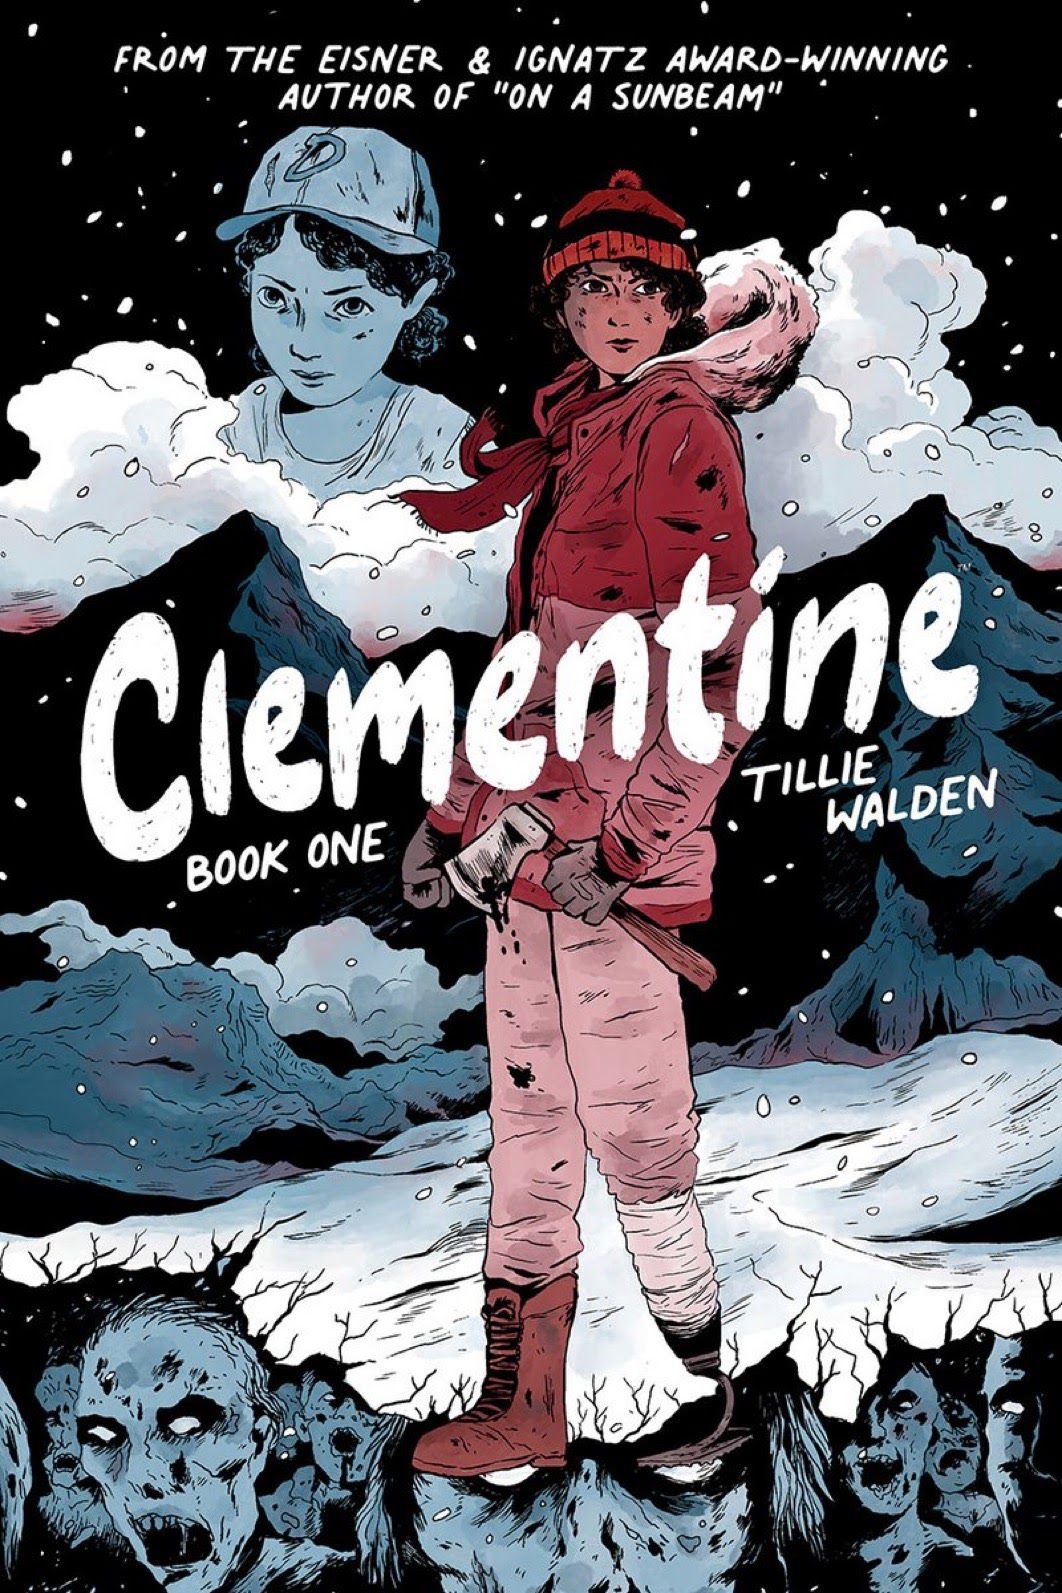 Clementine, the titular young girl in a zombie apocalypse, on the cover of The Walking Dead: Clementine (2022).